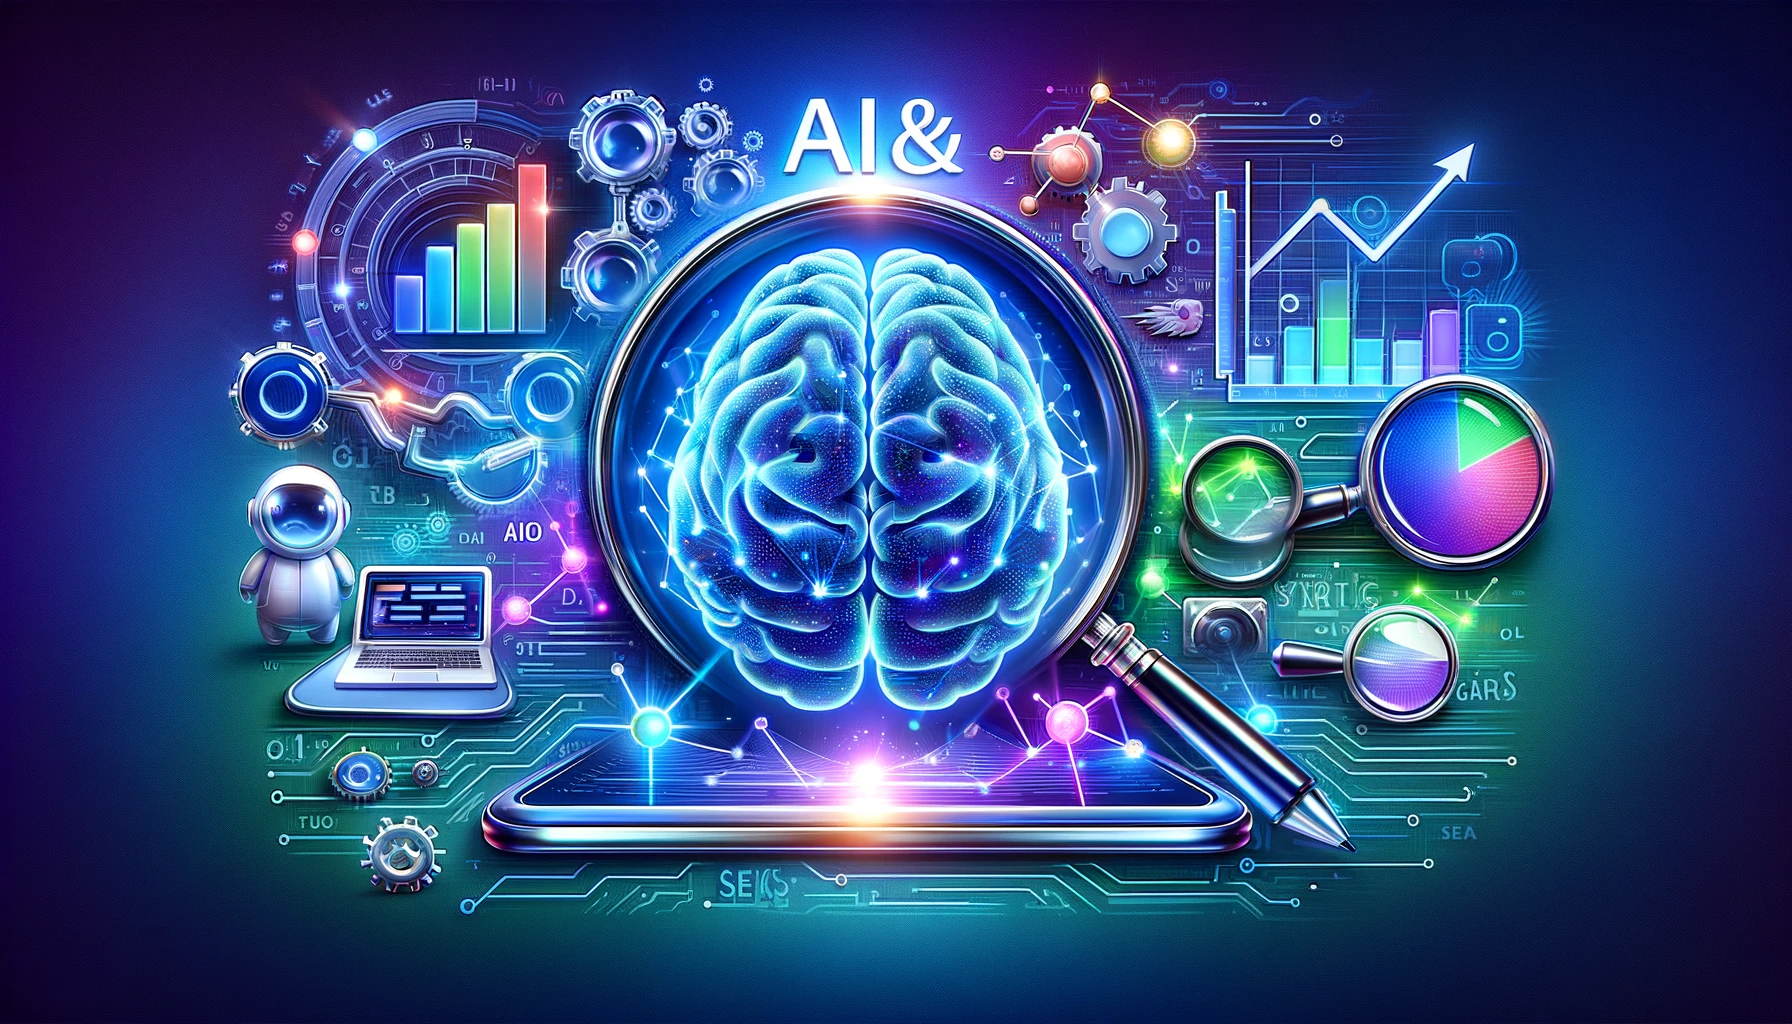 Illustration of AI technology and keyword analytics, depicting the synergy between artificial intelligence and advanced SEO strategies.